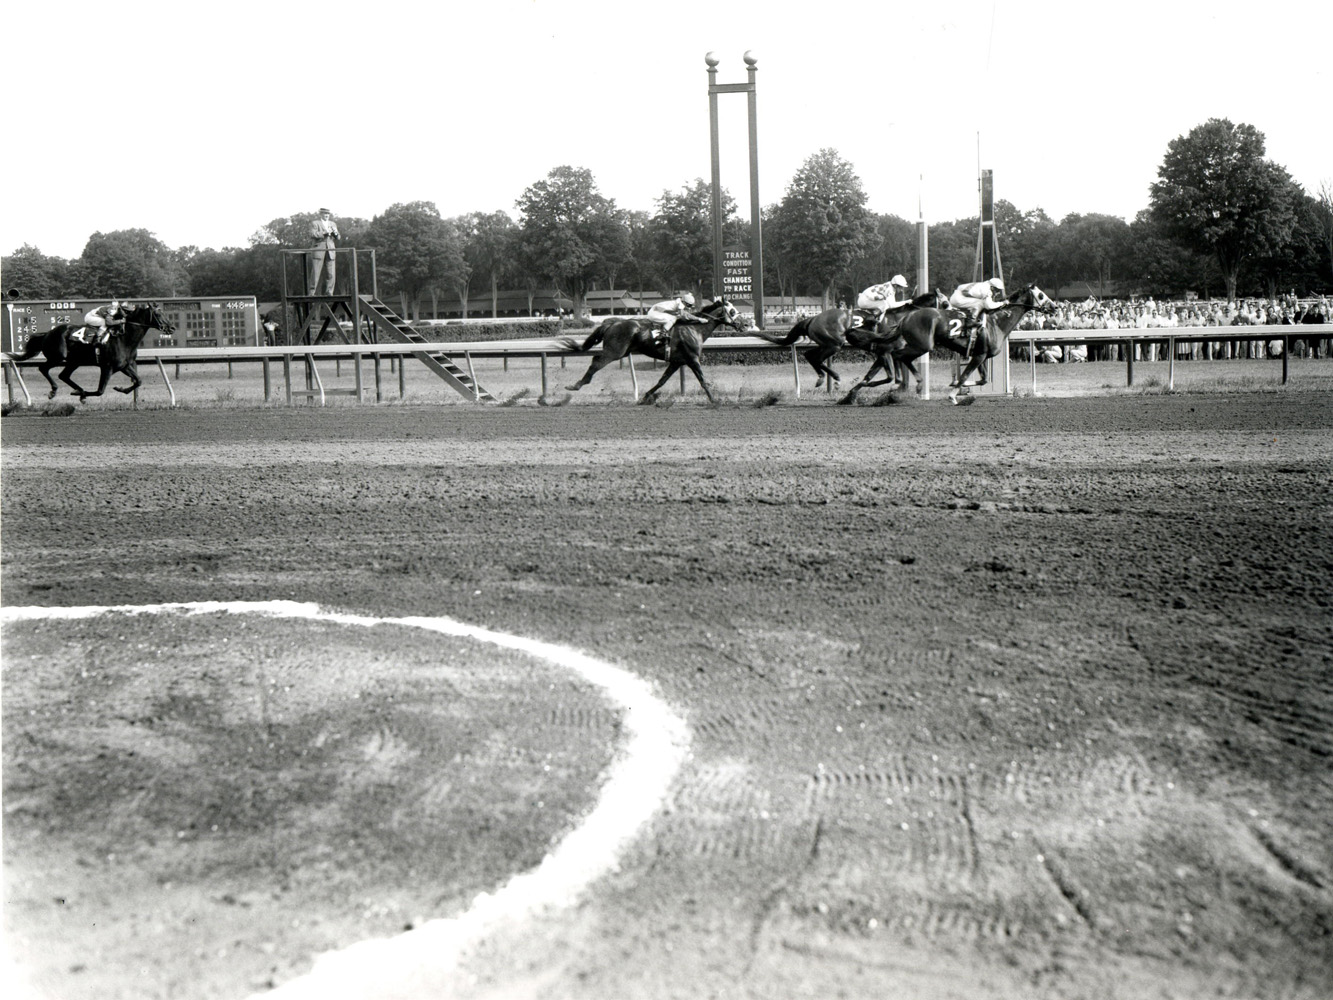 Manny Ycaza and Sword Dancer win the 1959 Travers Stakes at Saratoga (Keeneland Library Morgan Collection/Museum Collection)